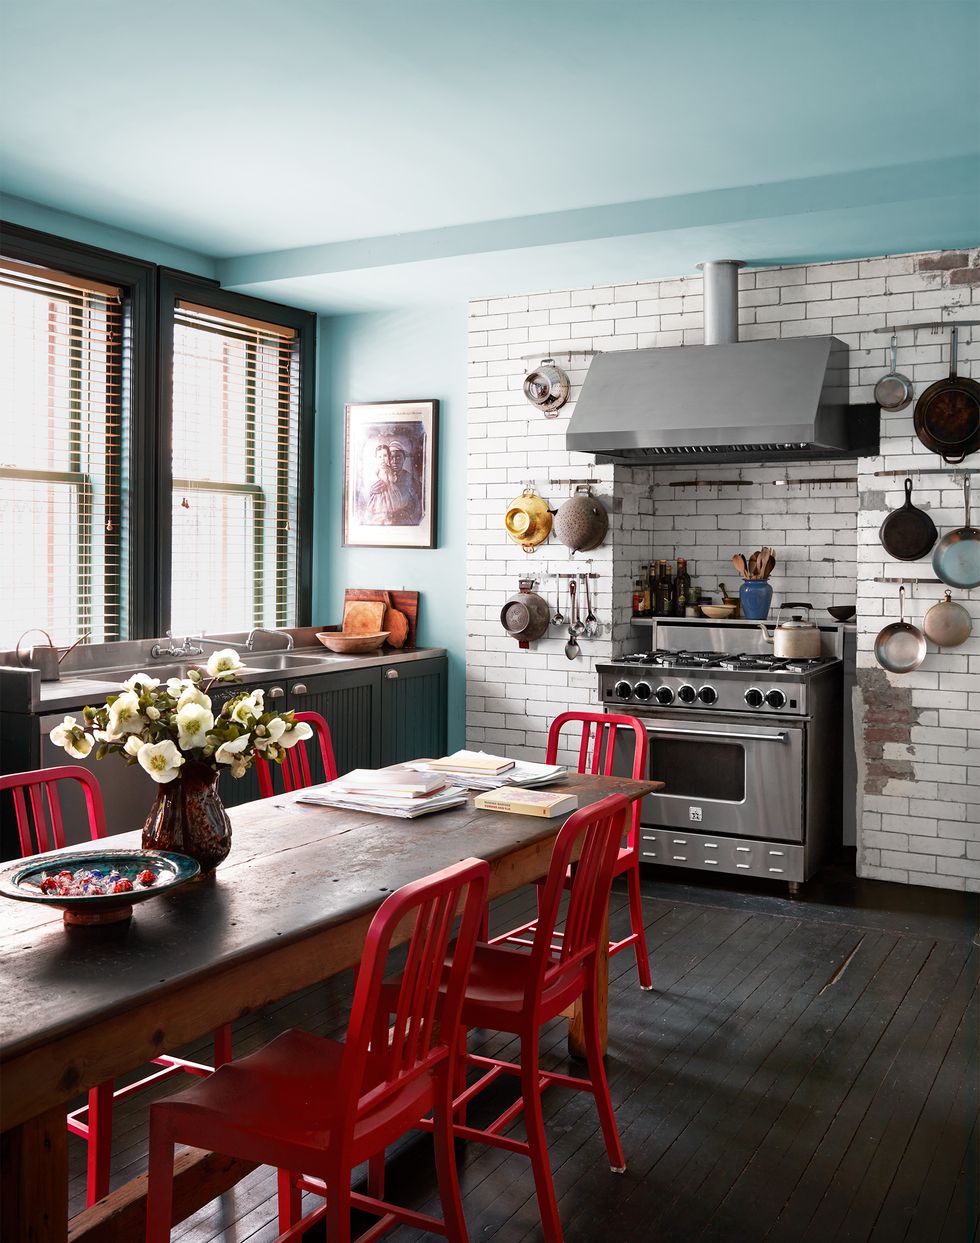 a kitchen has a long antique wood table with red chairs, a dark wood floor, light blue walls and ceiling, subway tiles surrounding a stove and pots and colanders hanging on both sides of it